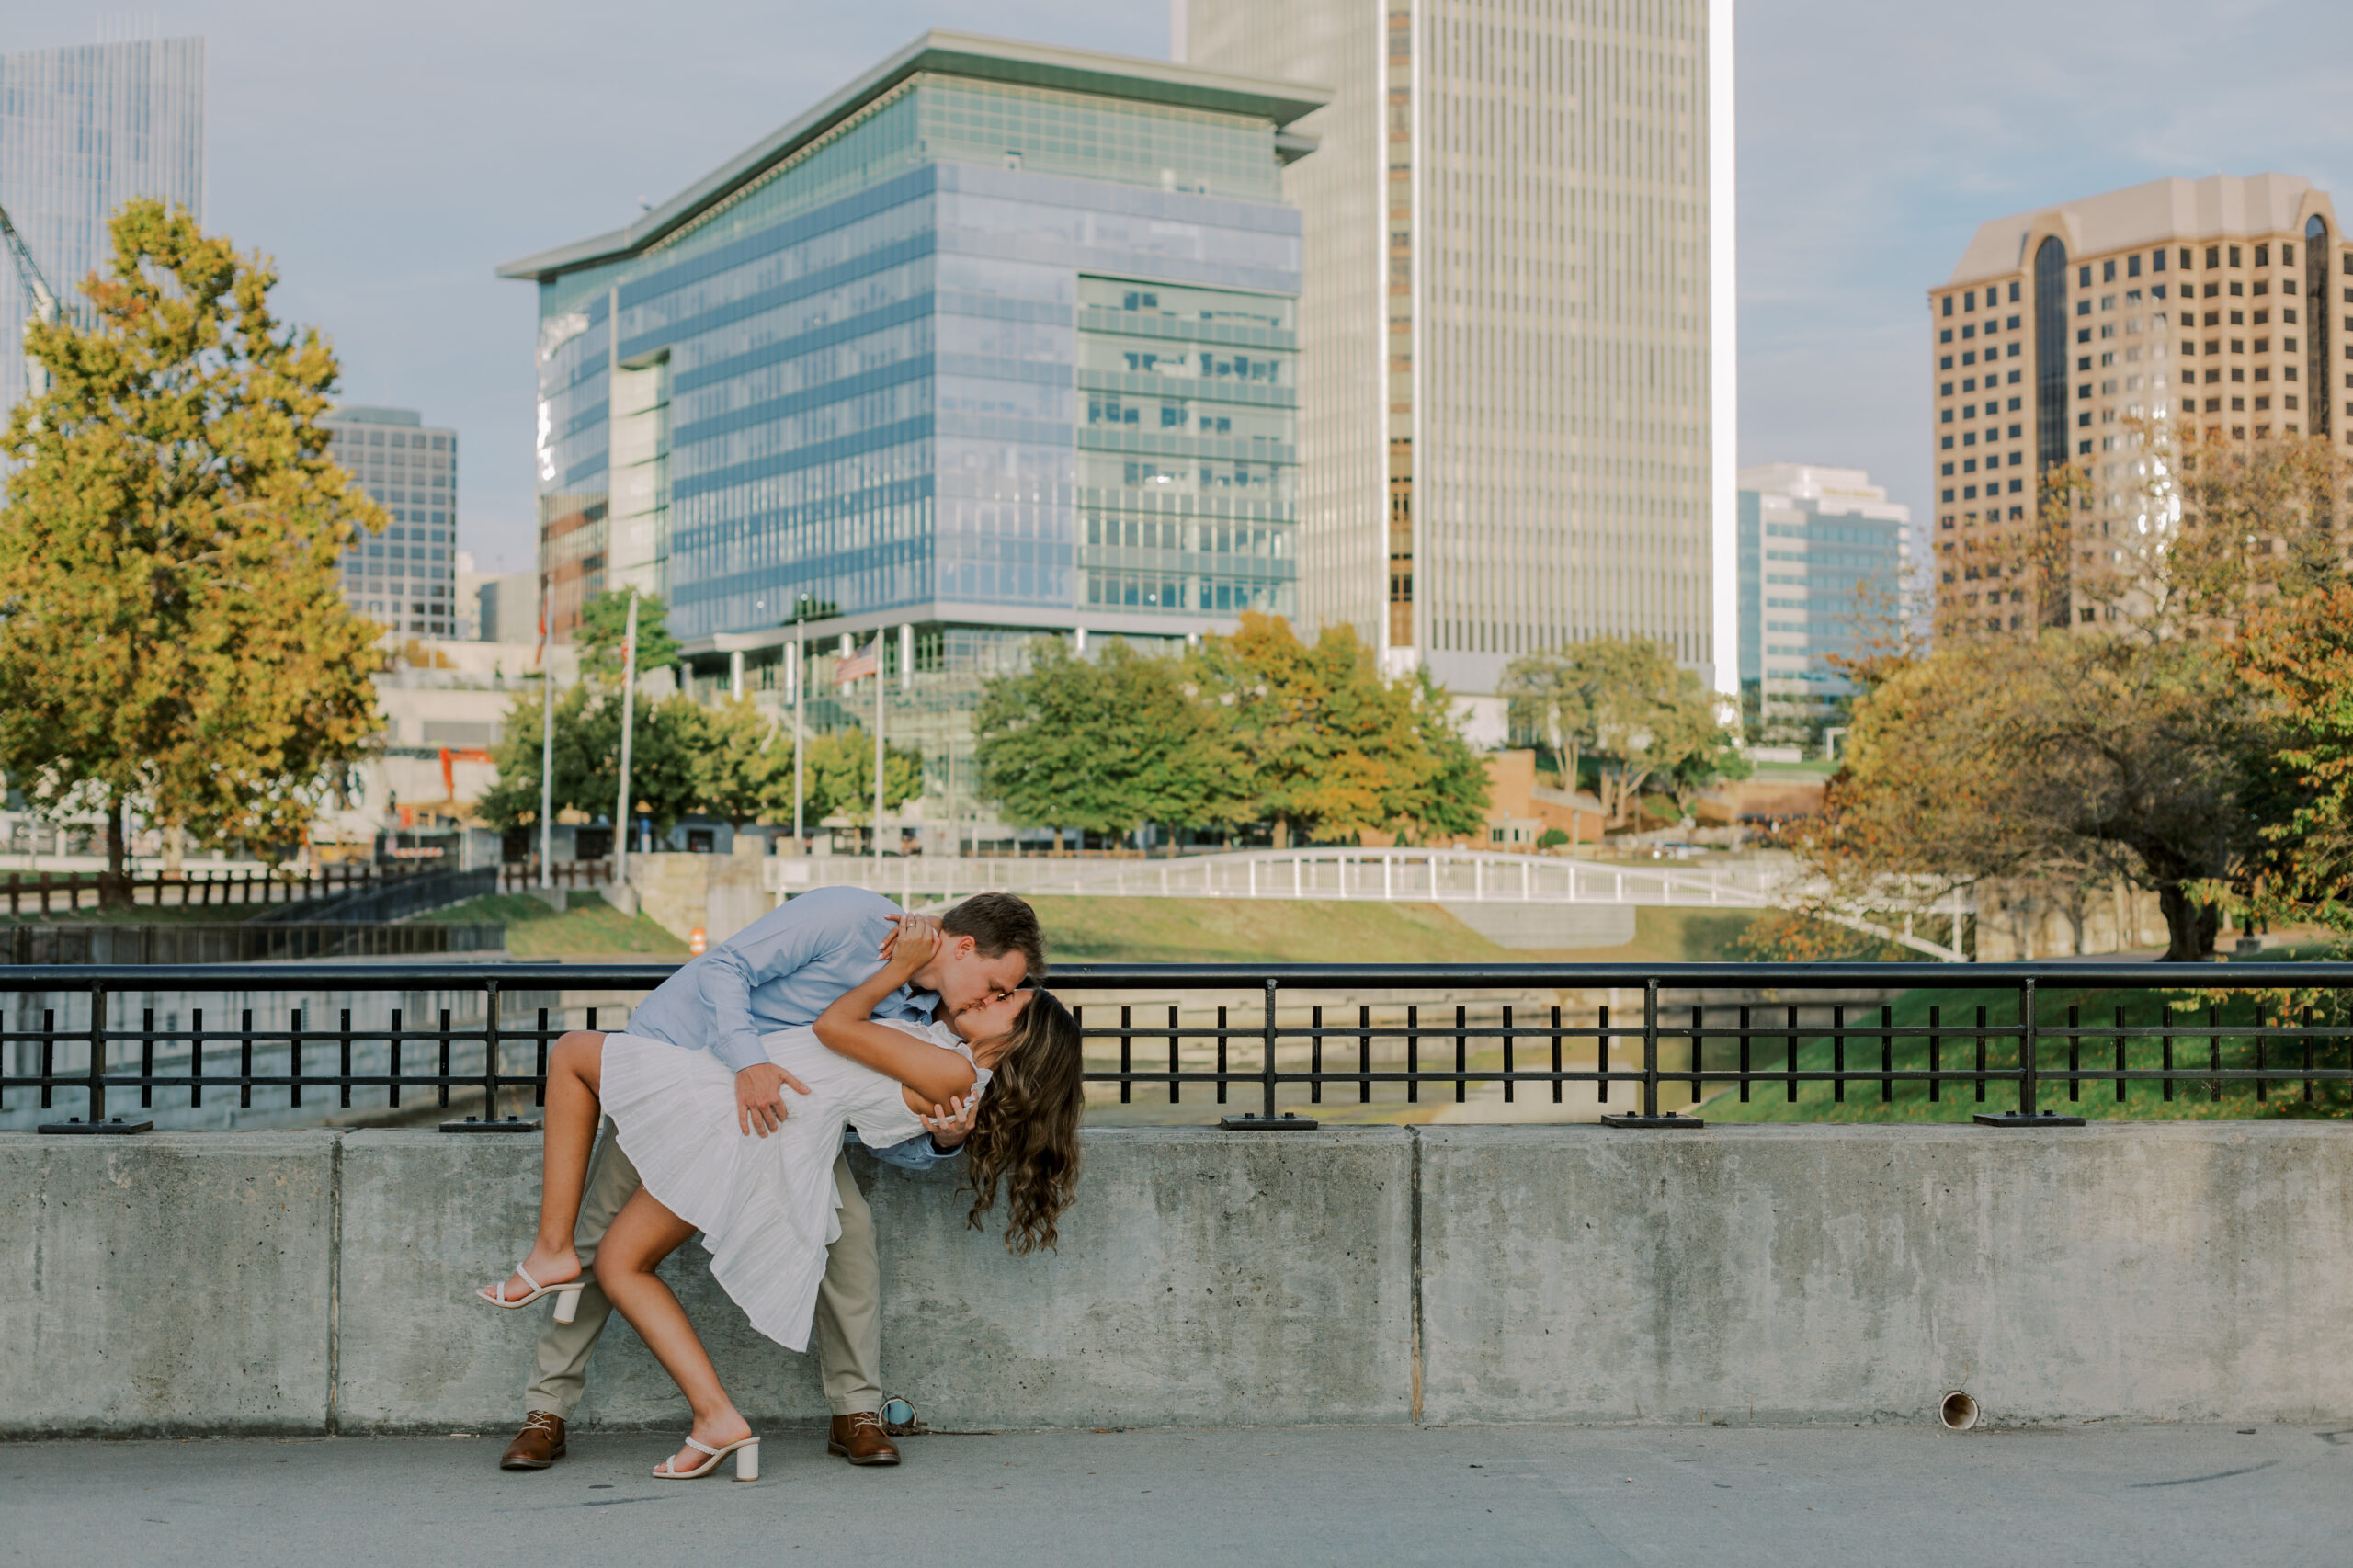 Man dipping woman, sharing a kiss overlooking buildings in the city of richmond, va